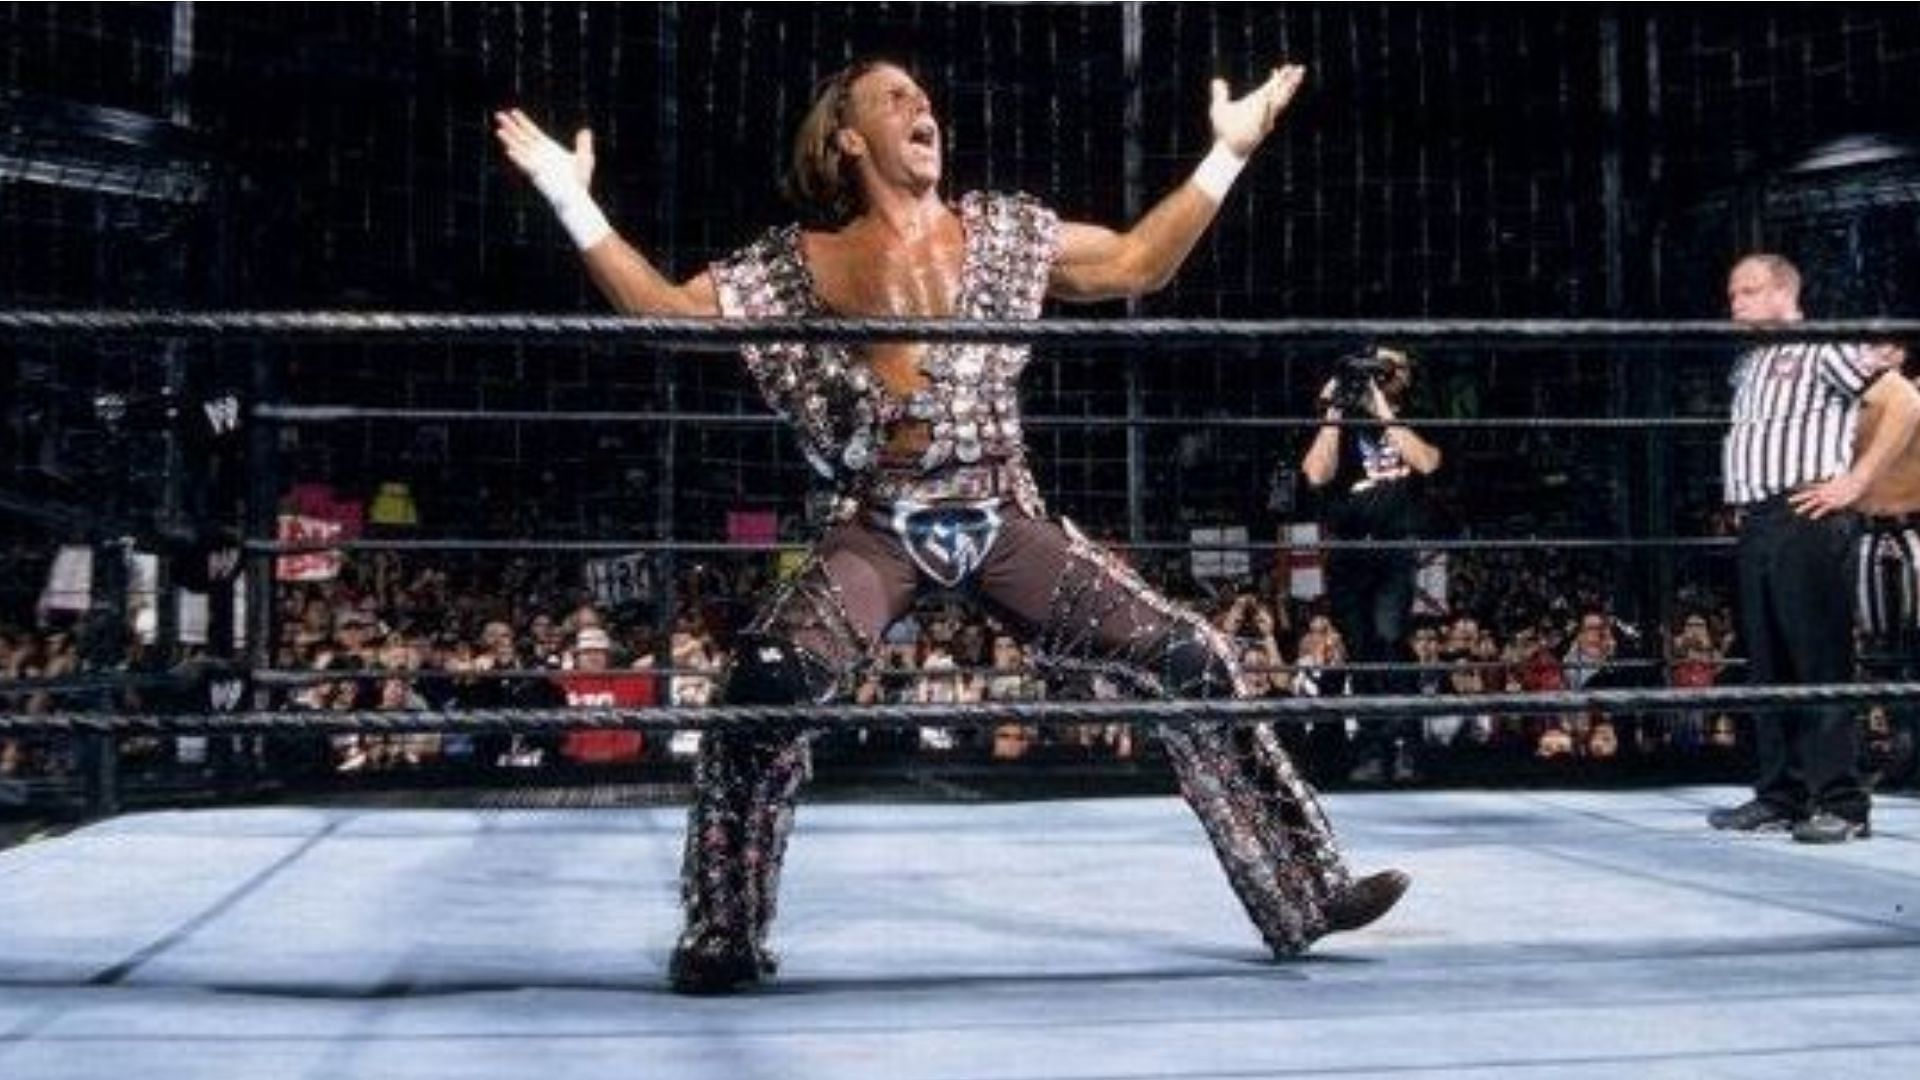 Shawn Michaels won the first ever elimination chamber match at Survivor Series 2002.